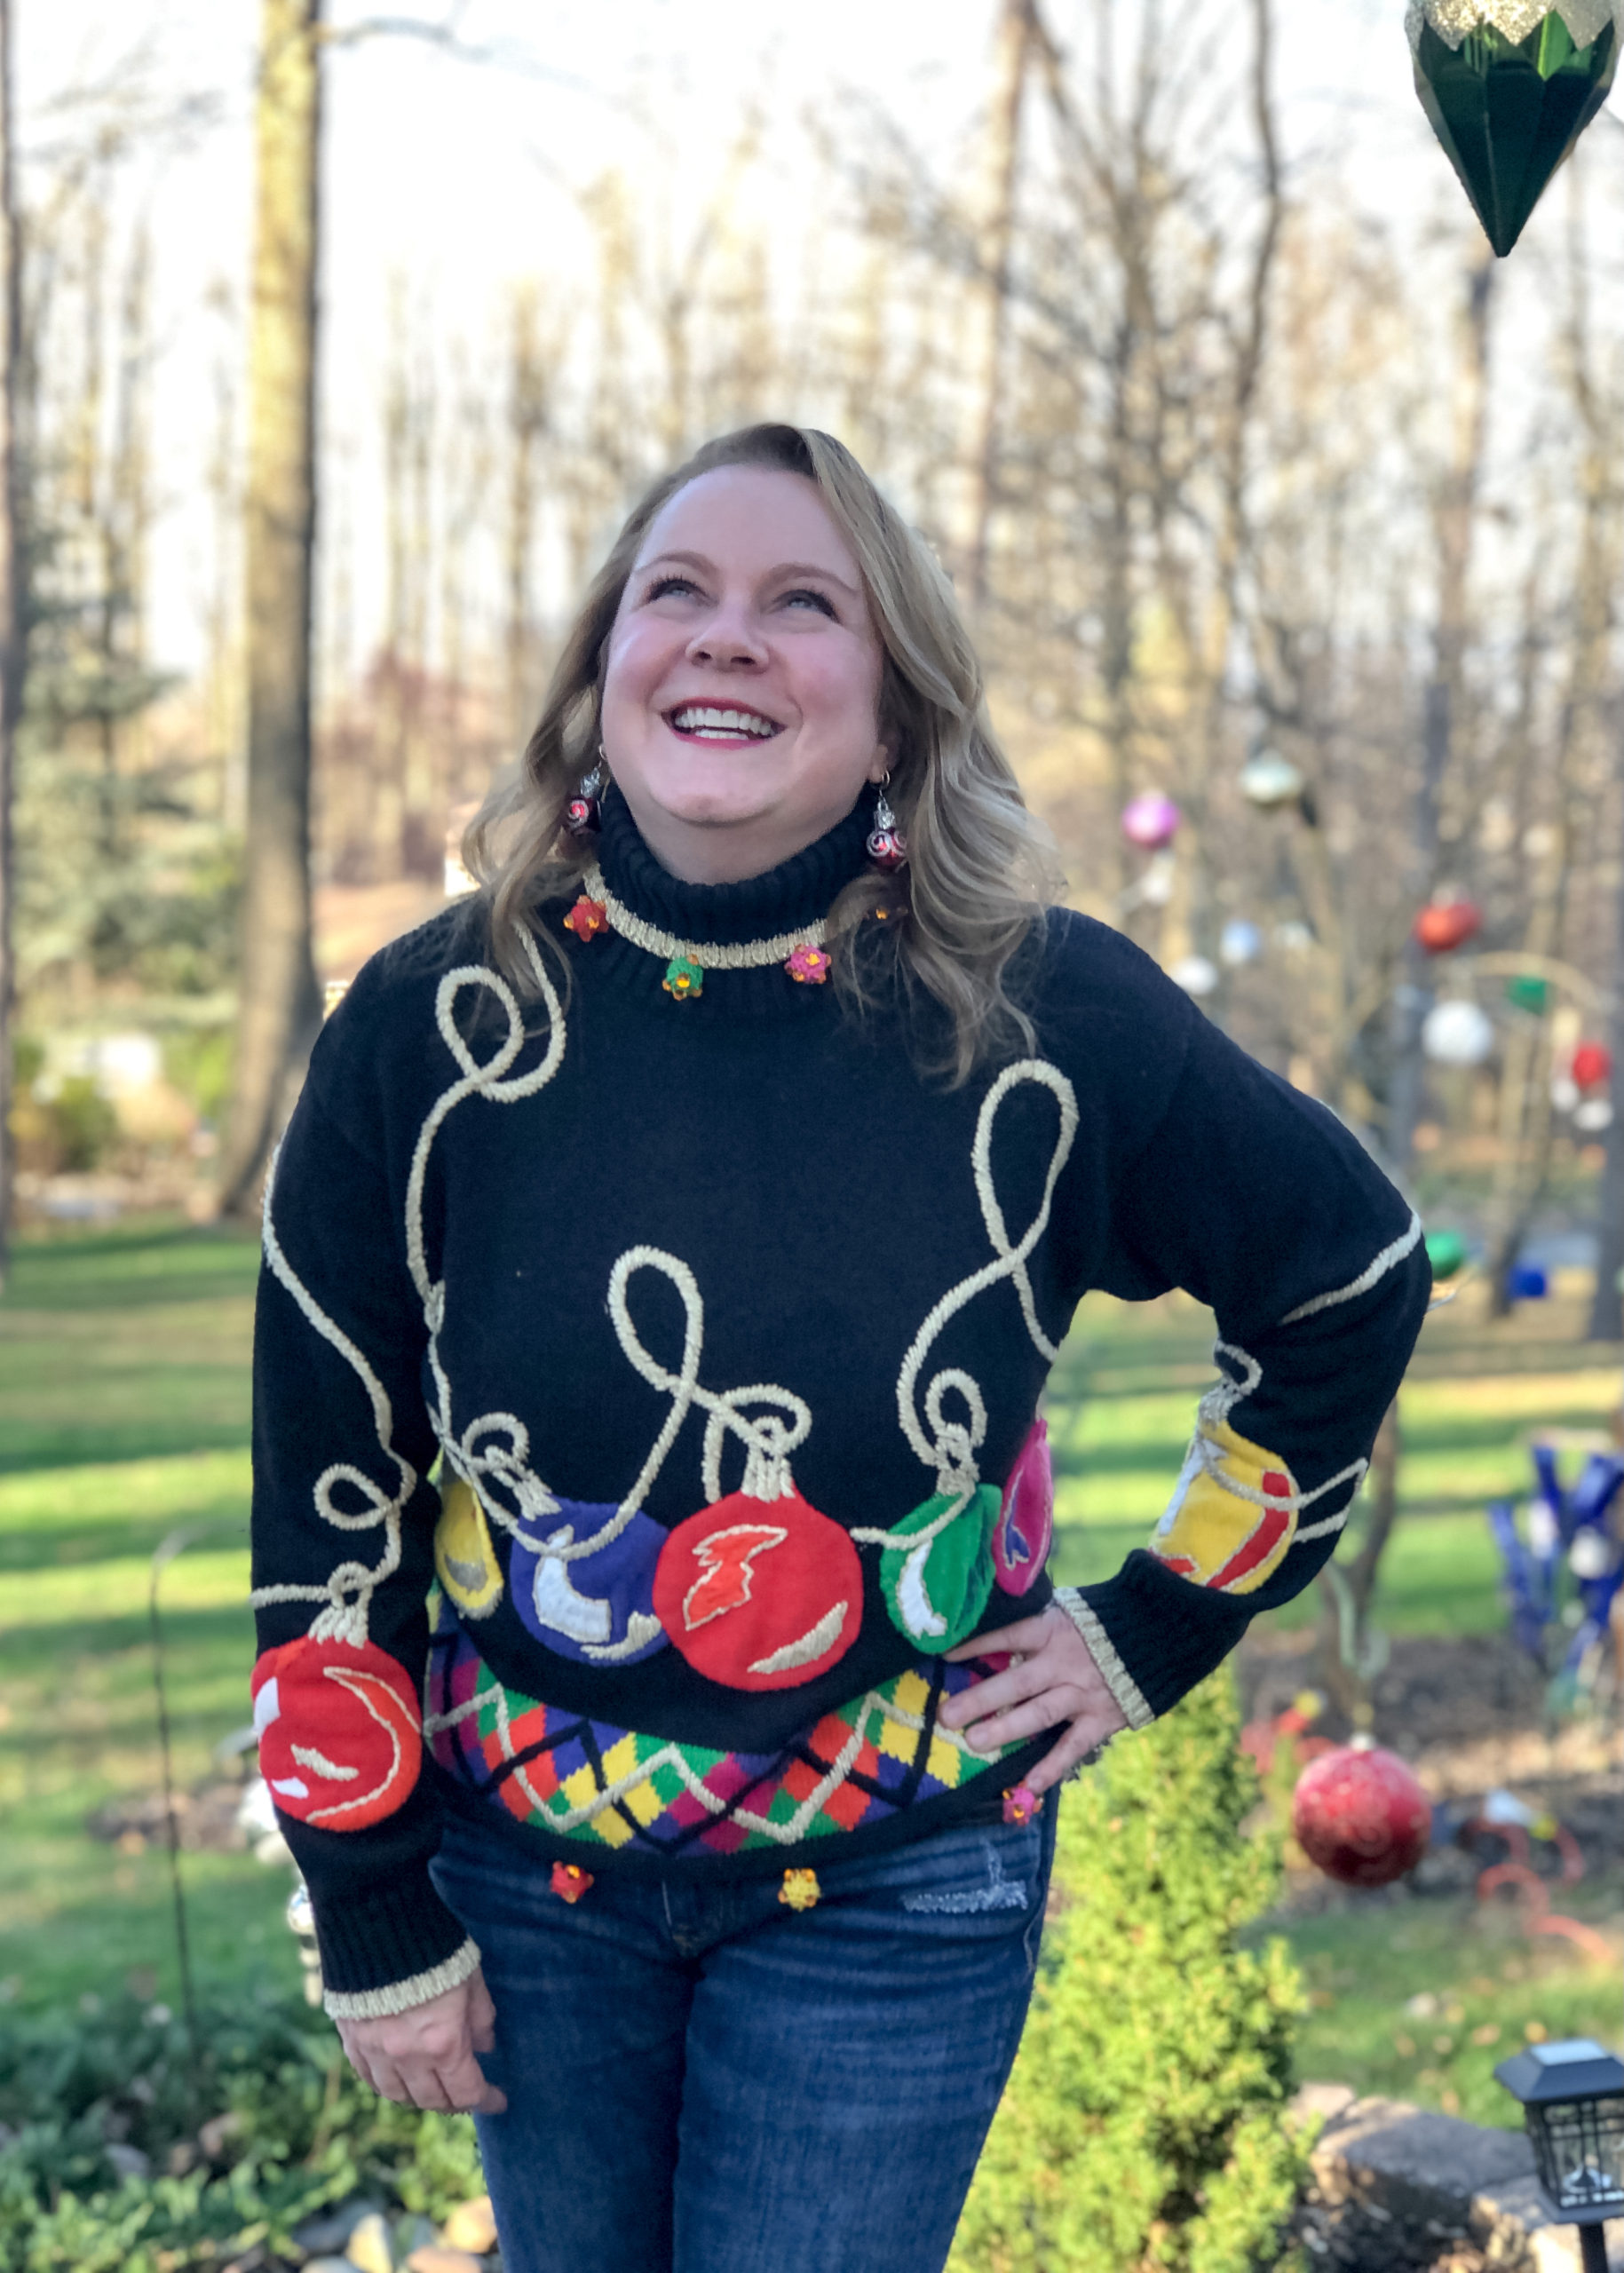 homoseksuel antydning Rund It's a Merry 80s Christmas! | Goodwill Keystone Area Fashion Blog